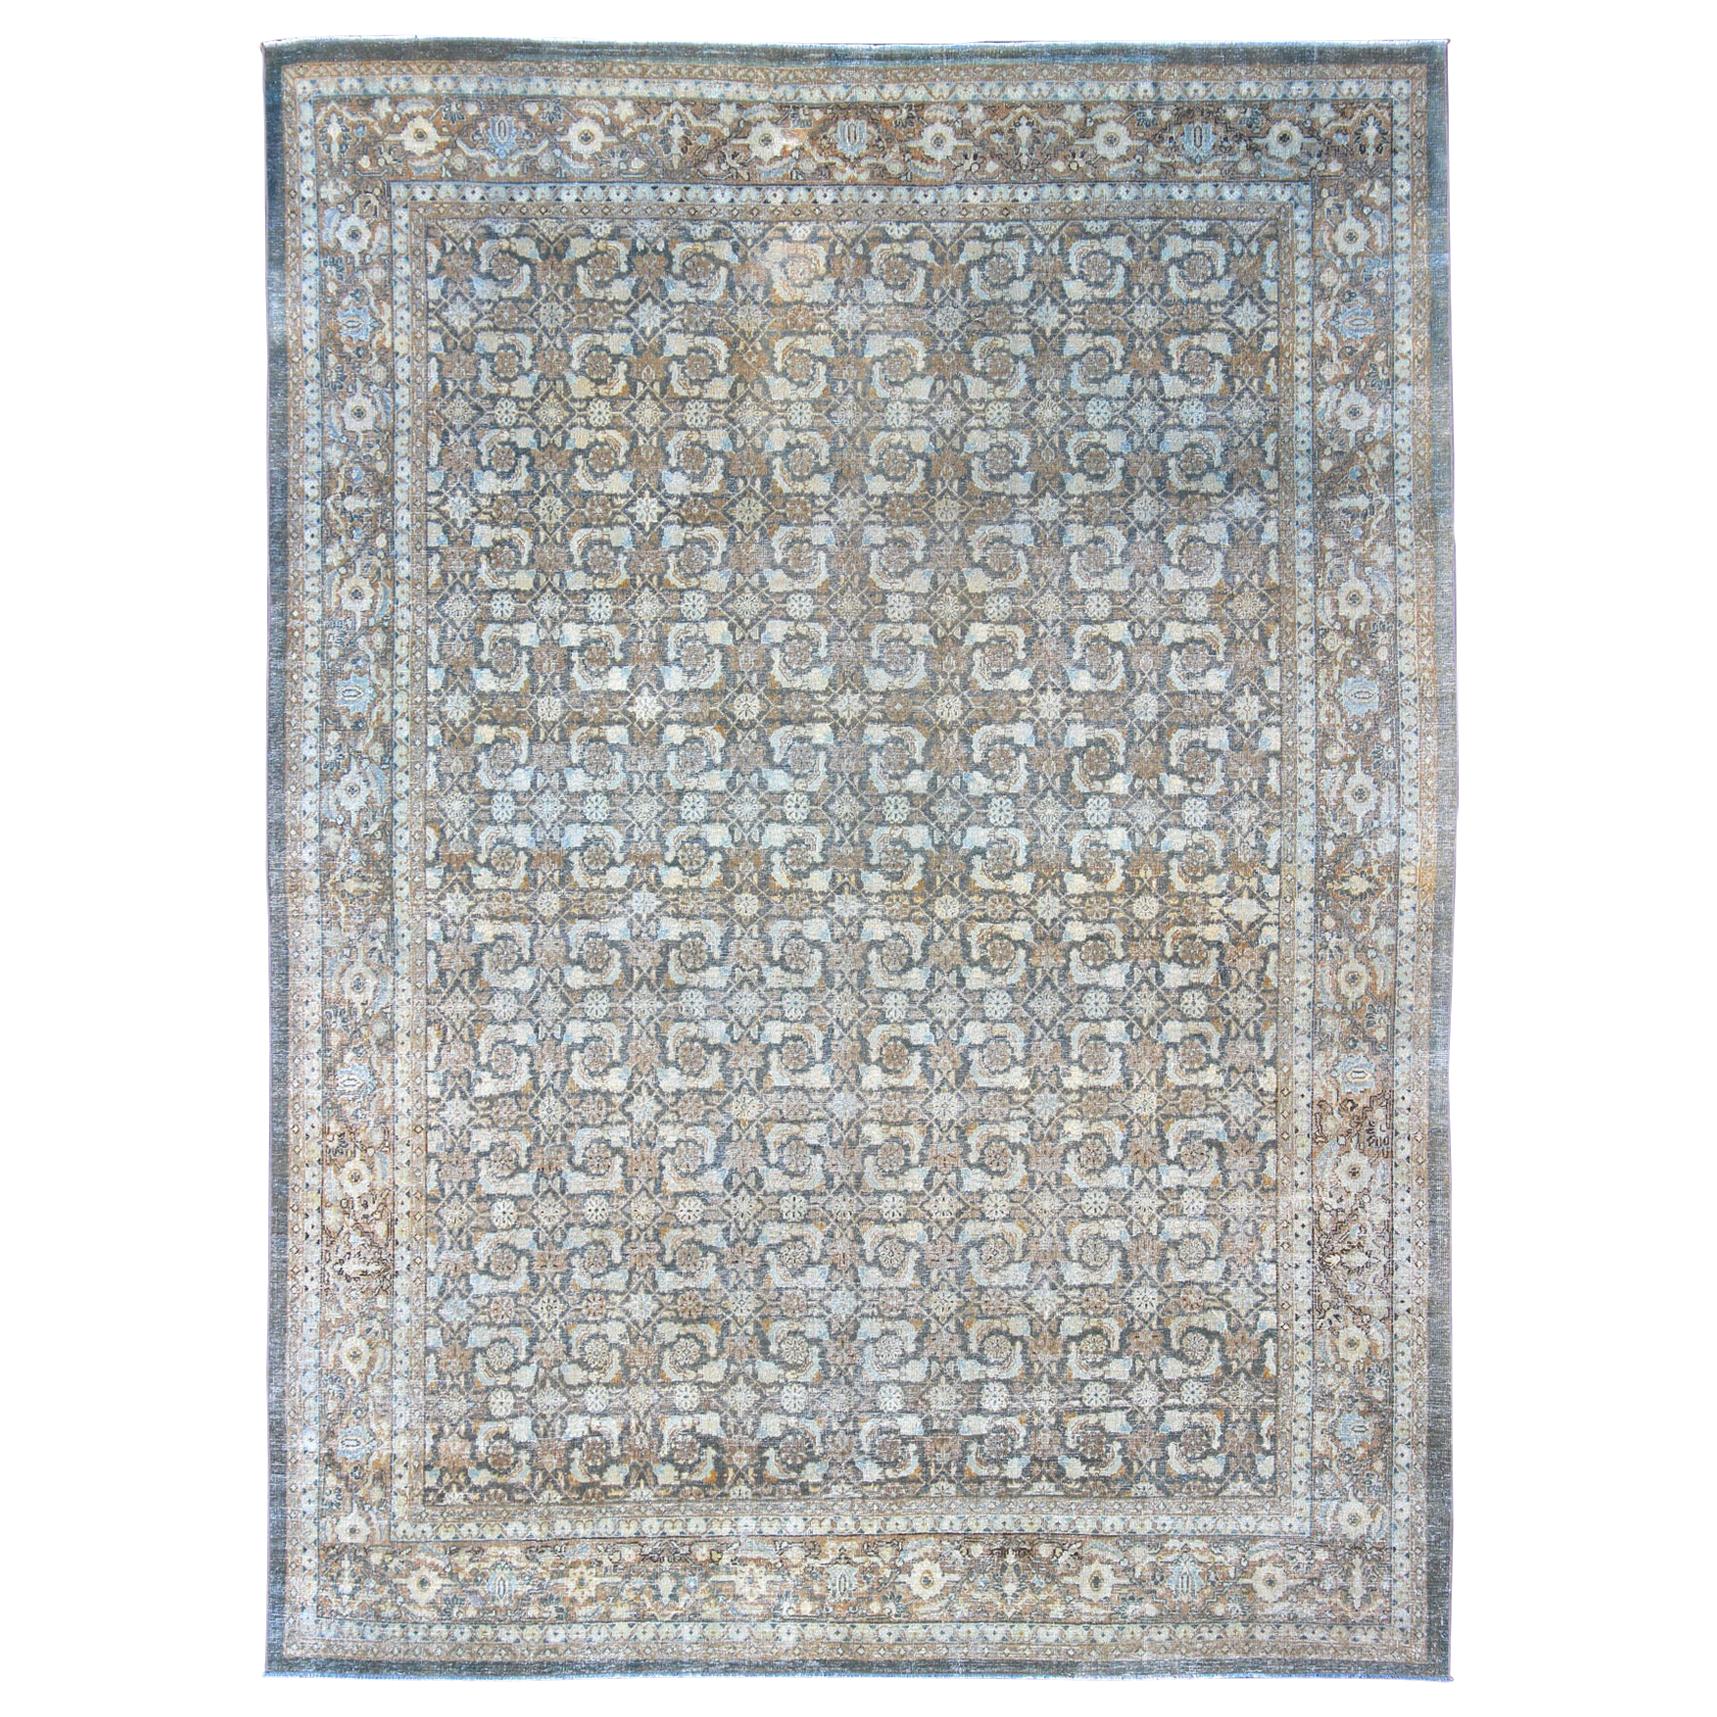 Antique Persian Sultanabad Distressed Rug in Blue, Blue Gray and Light Brown